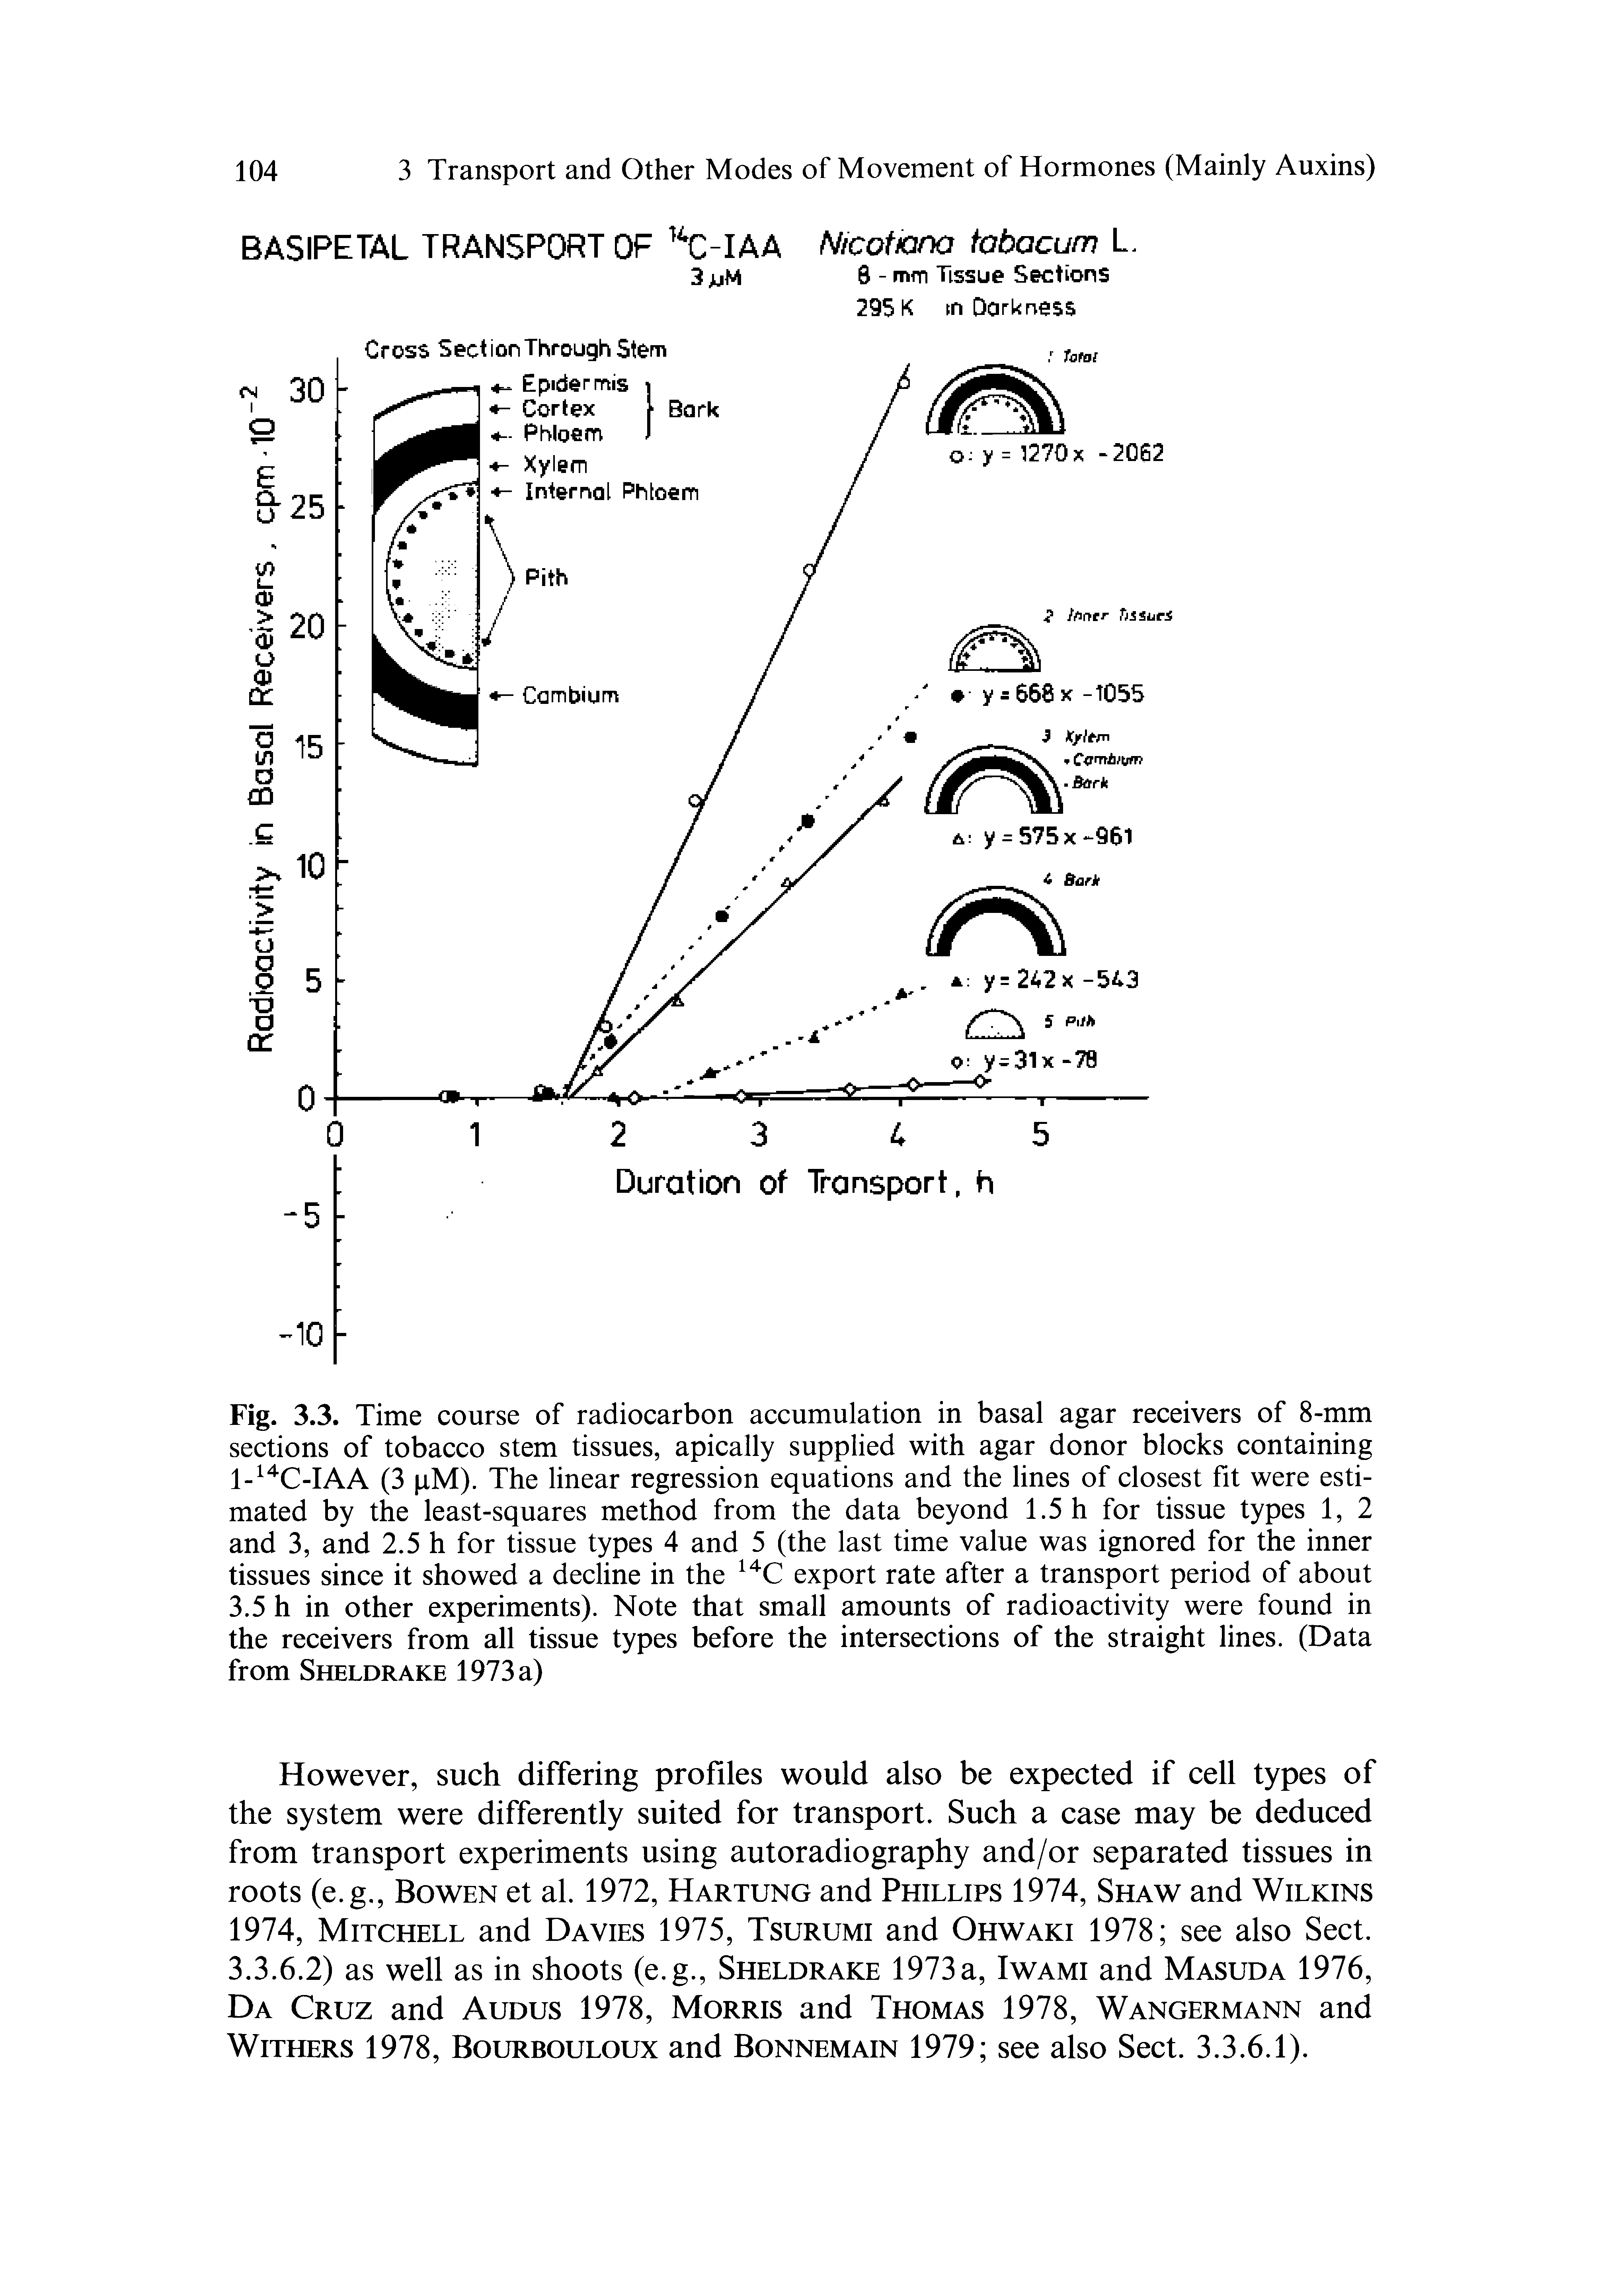 Fig. 3.3. Time course of radiocarbon accumulation in basal agar receivers of 8-mm sections of tobacco stem tissues, apically supplied with agar donor blocks containing l i C IAA (3 pM). The linear regression equations and the lines of closest fit were estimated by the least-squares method from the data beyond 1.5 h for tissue types 1, 2 and 3, and 2.5 h for tissue types 4 and 5 (the last time value was ignored for the inner tissues since it showed a decline in the export rate after a transport period of about 3.5 h in other experiments). Note that small amounts of radioactivity were found in the receivers from all tissue types before the intersections of the straight lines. (Data from Sheldrake 1973 a)...